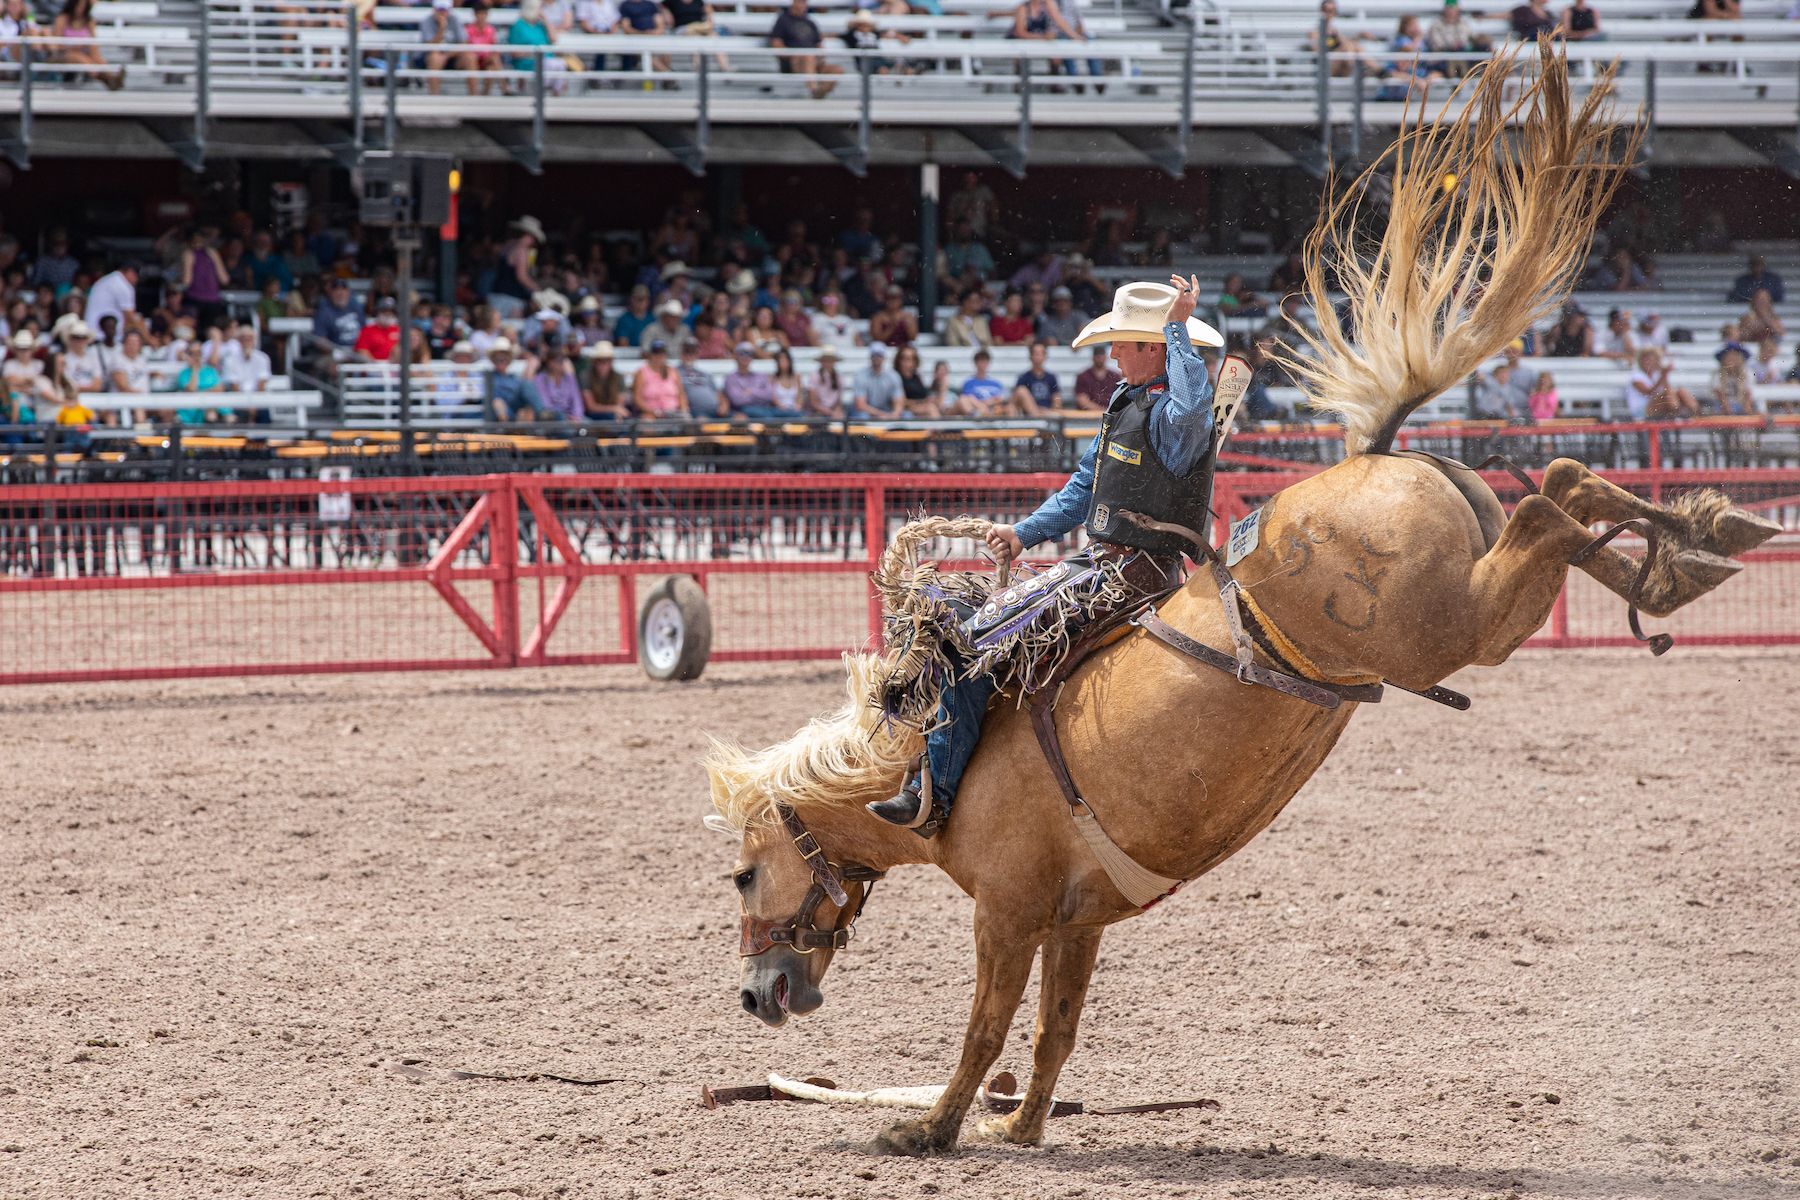 World's Largest Outdoor Rodeo, world record in Cheyenne, Wyoming